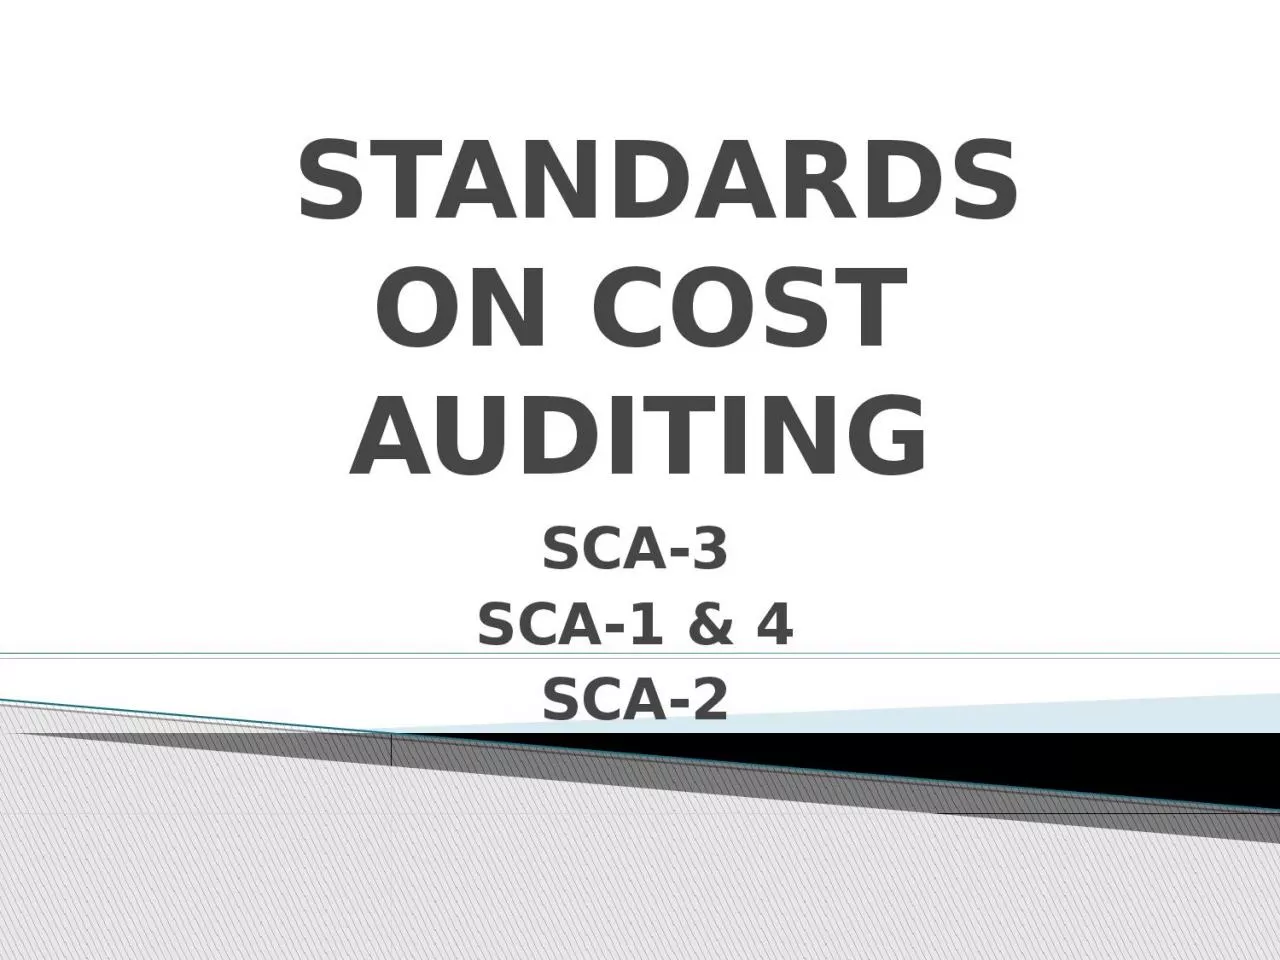 STANDARDS ON COST AUDITING